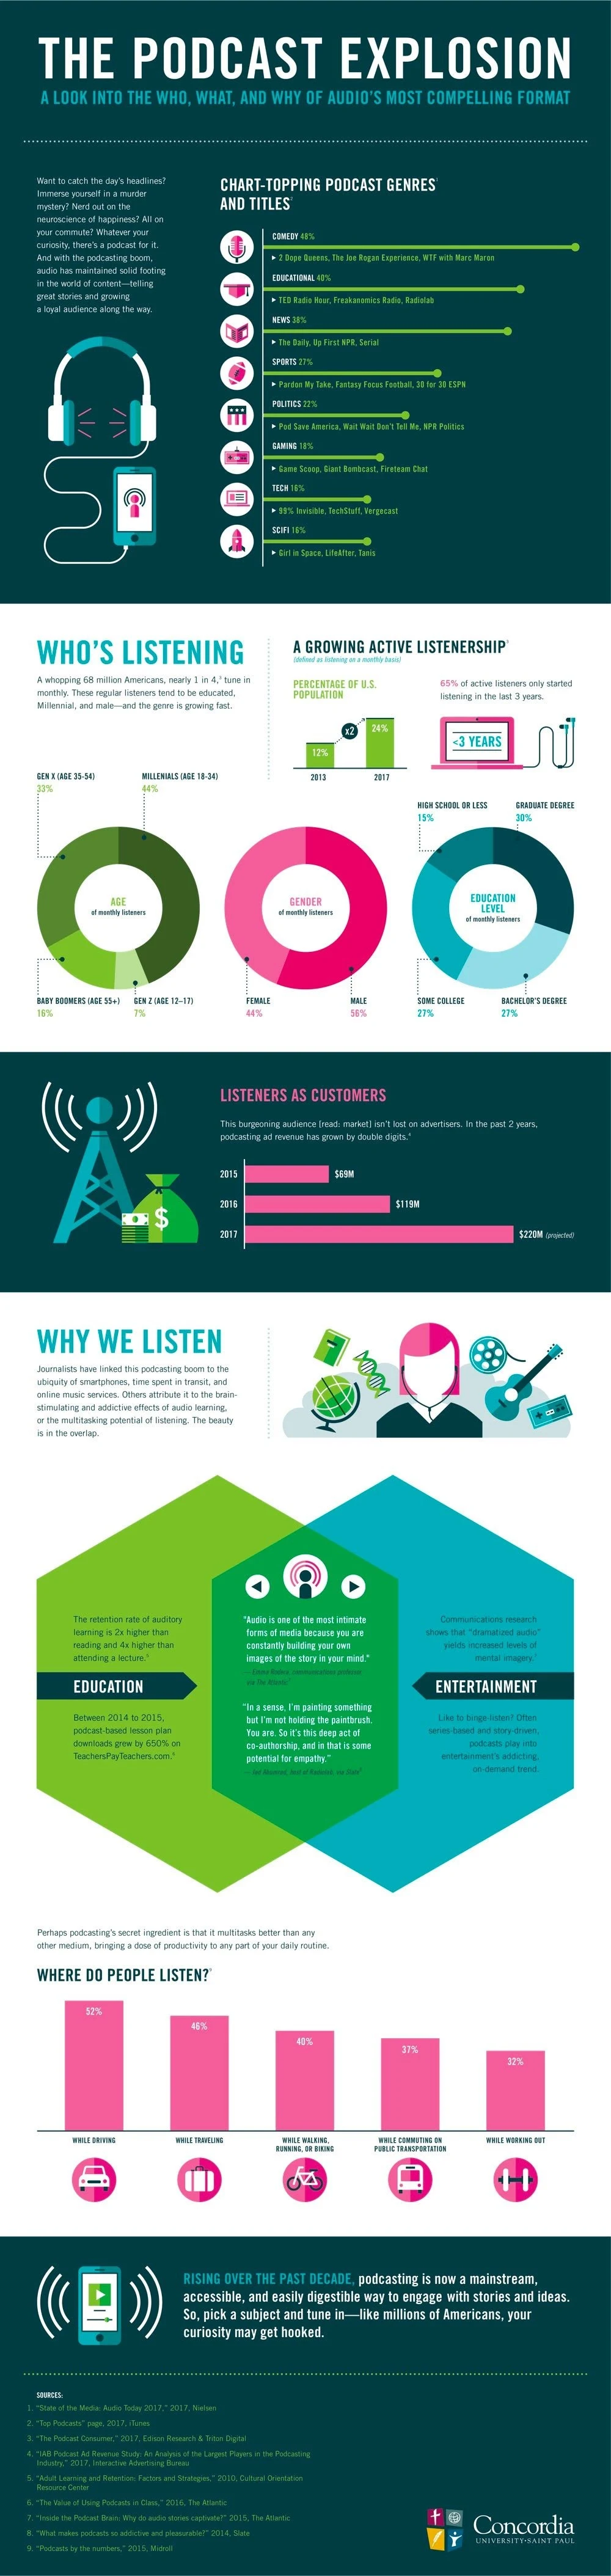 The Podcast Explosion - #infographic